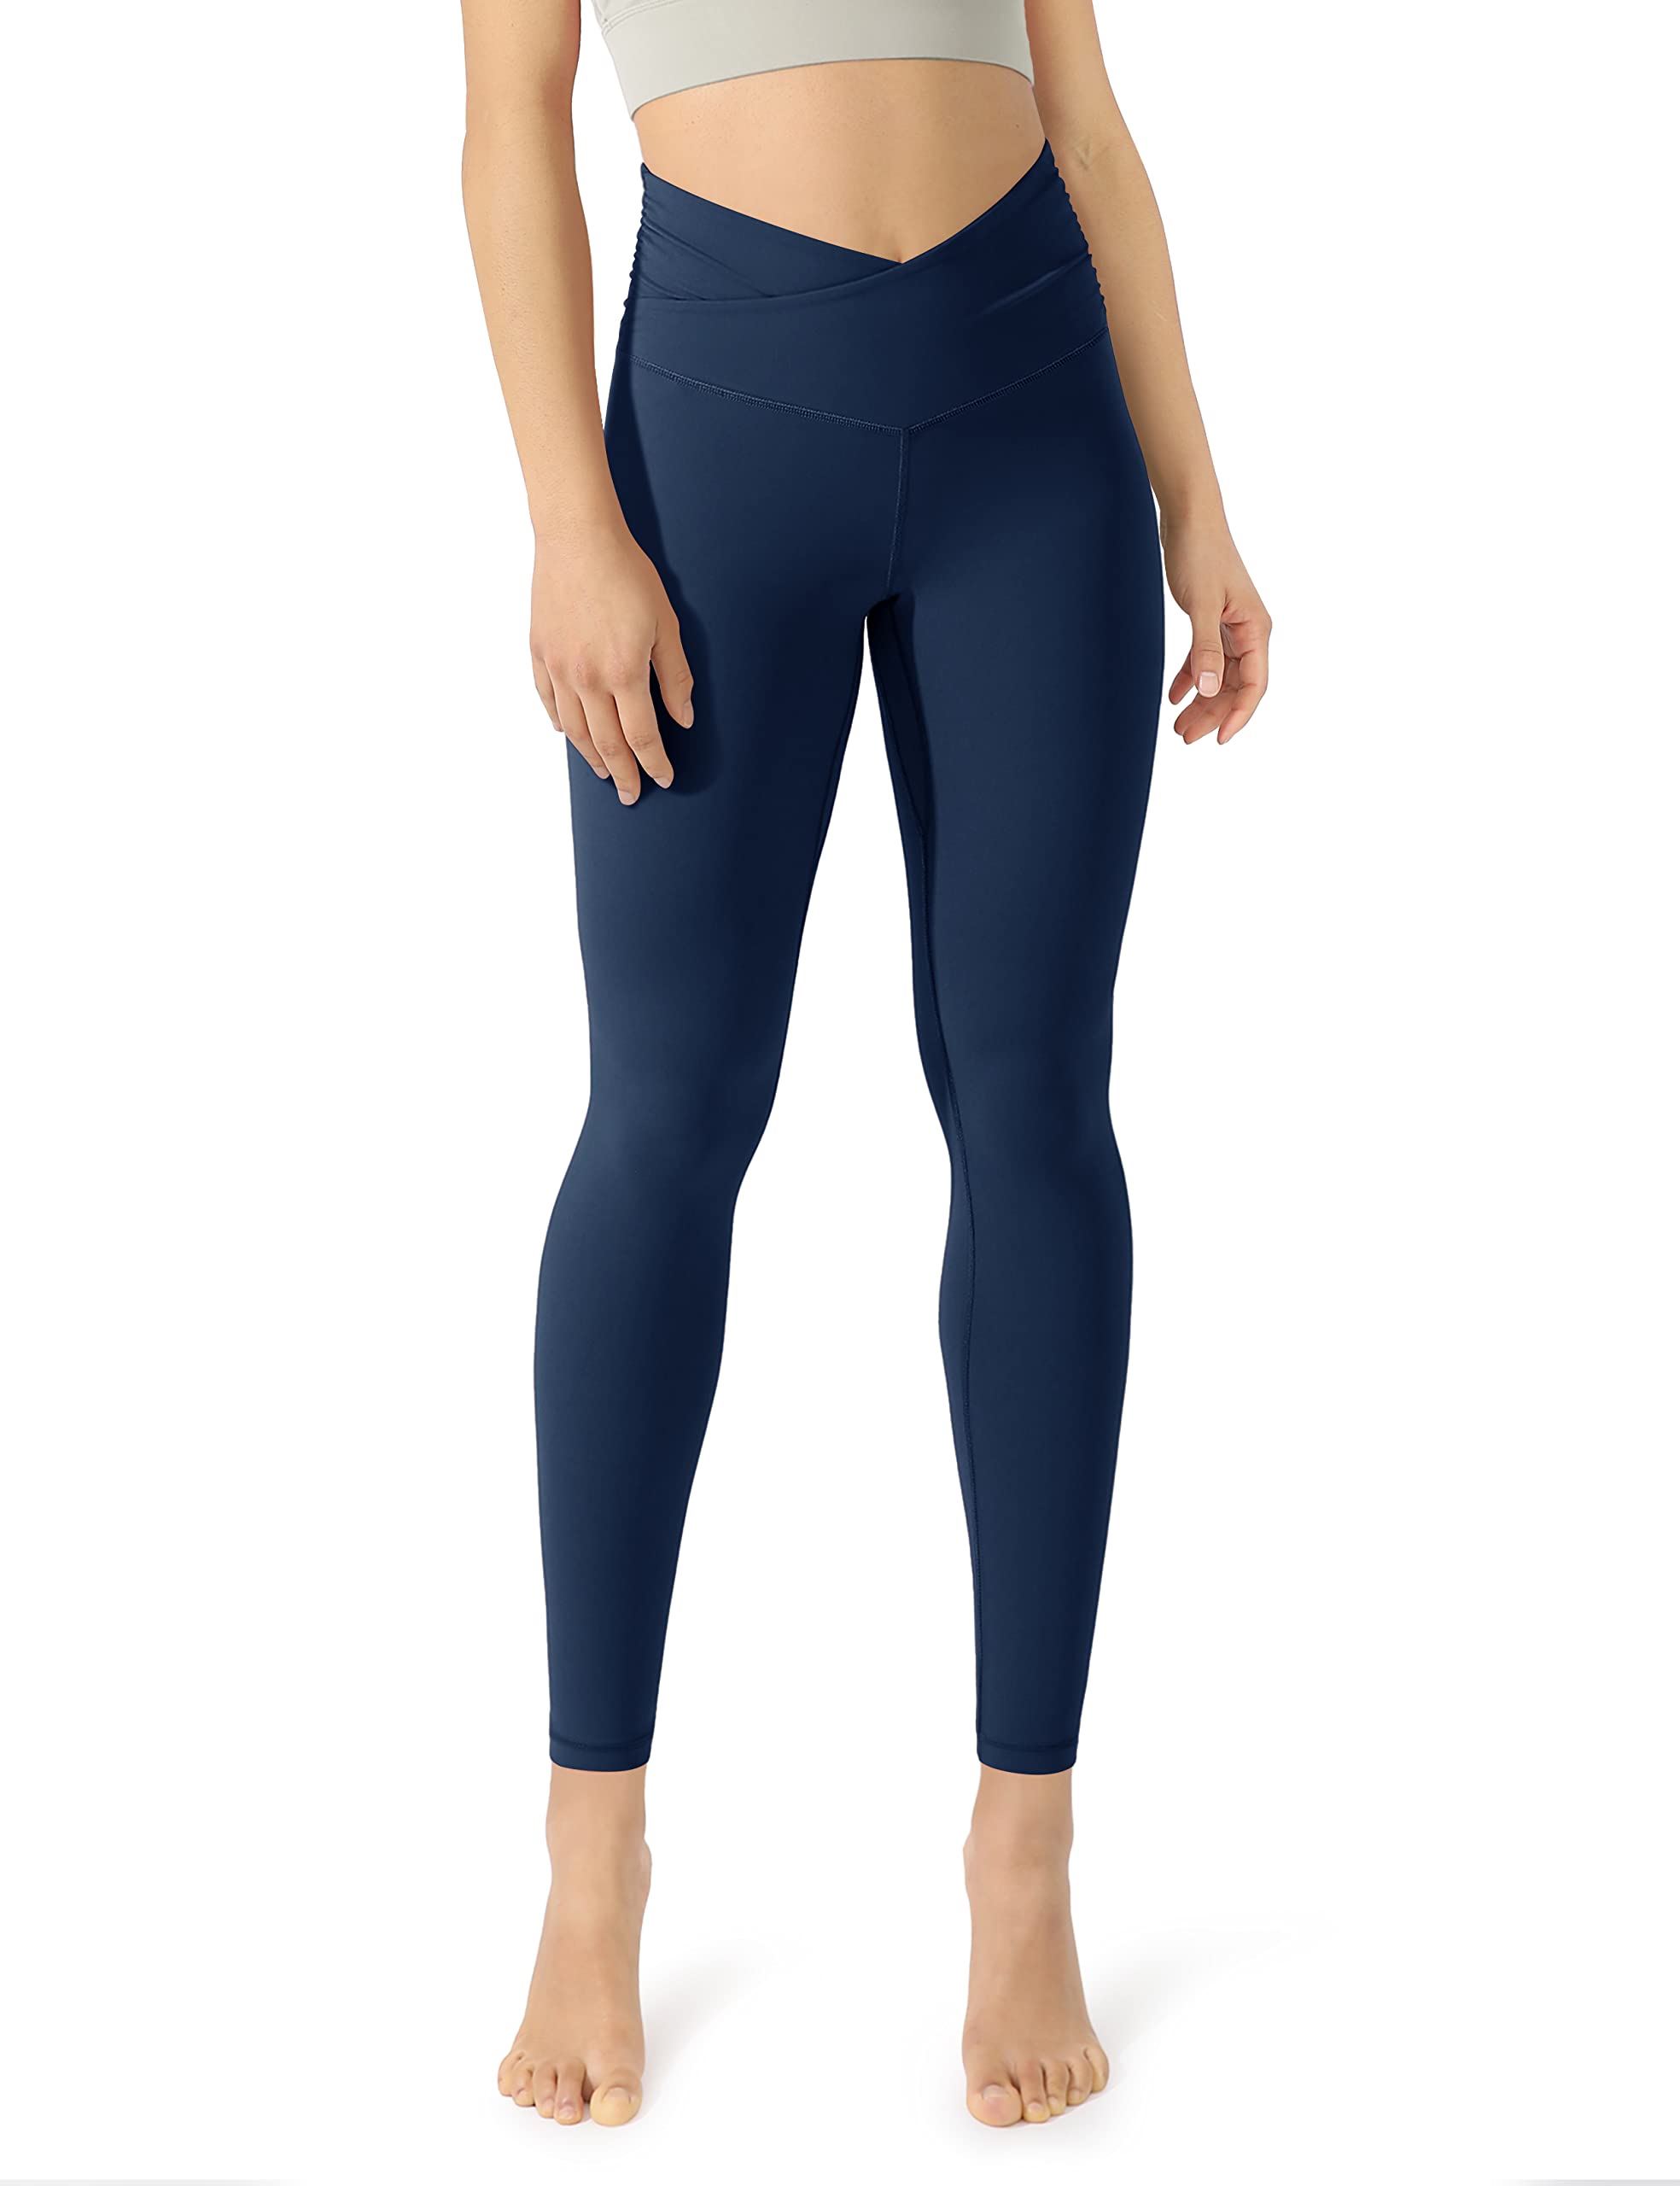 ODODOS Womens cross Waist 78 Yoga Leggings with Hidden Pocket, compression  Workout Running Yoga Pants -Inseam 25, Navy, Large